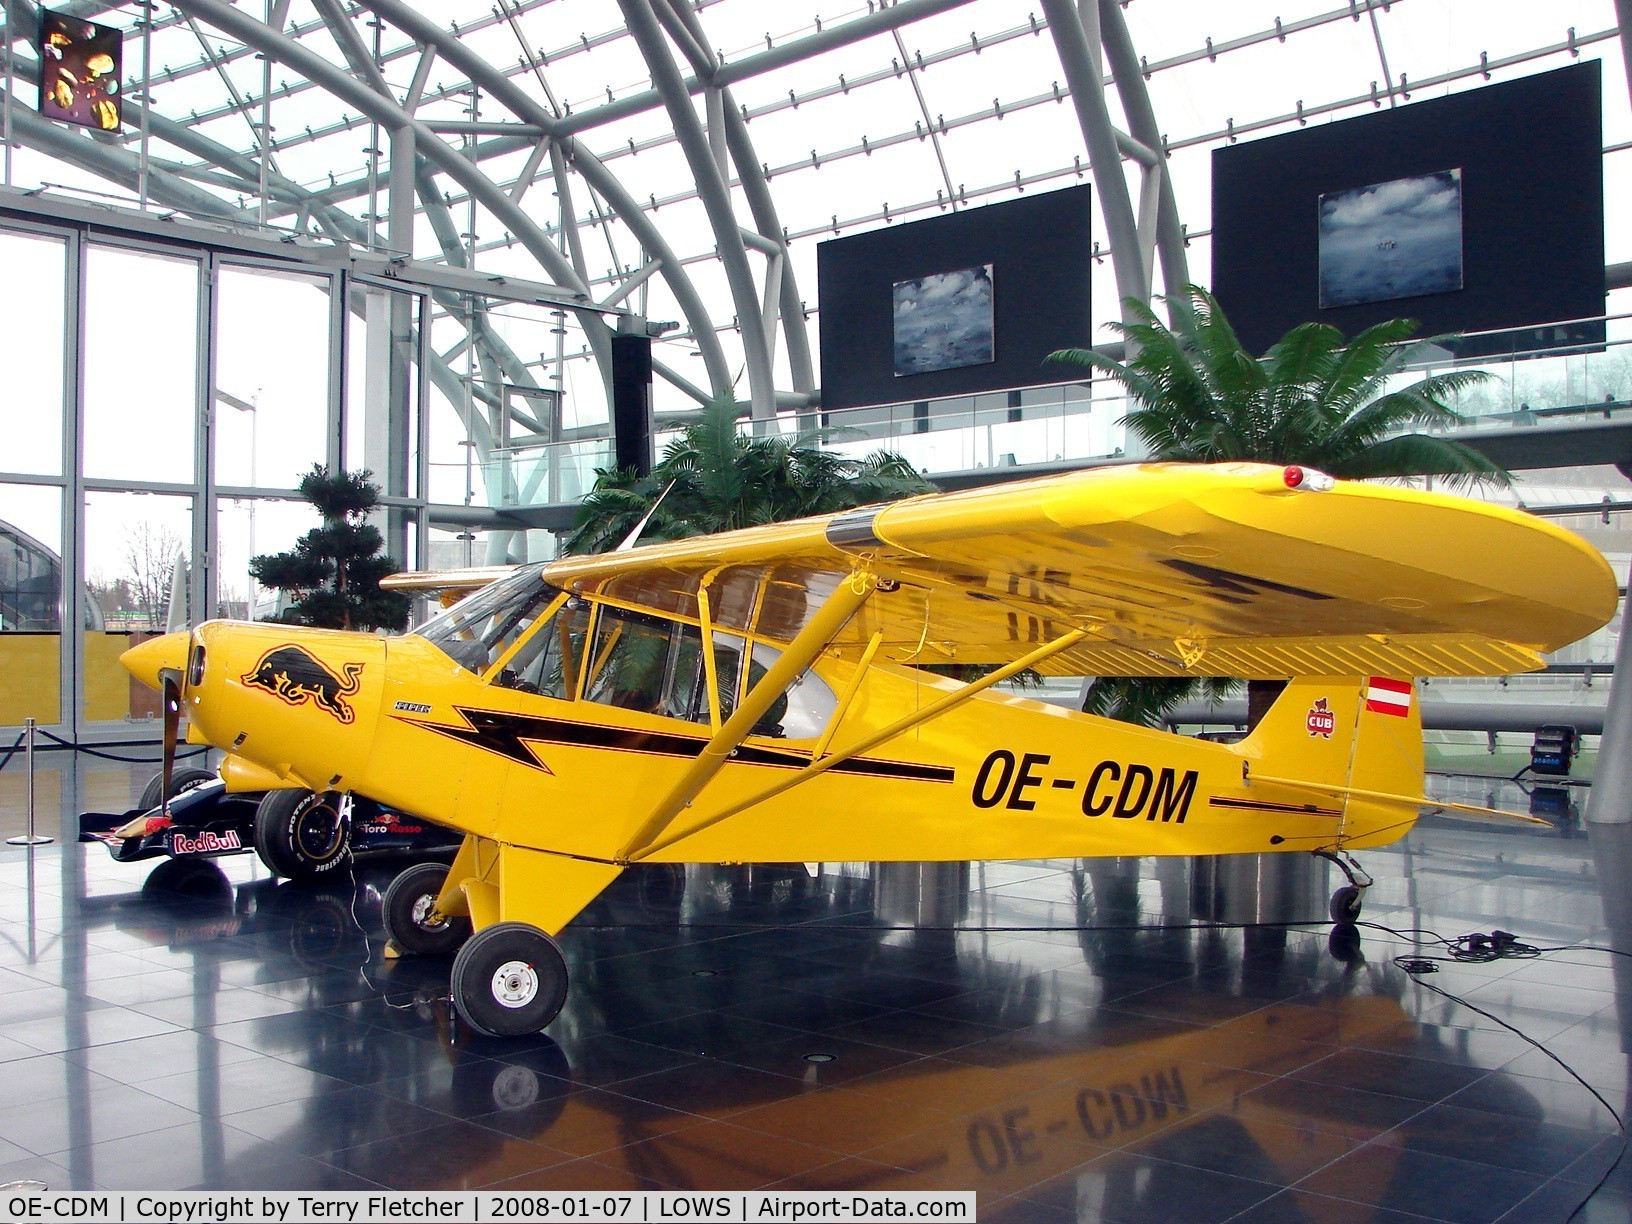 OE-CDM, Piper PA-18-150 Super Cub C/N 1809019, One of the very last Piper Cubs ever built and now displayed at the Hangar 7 Museum , Salzburg Airport